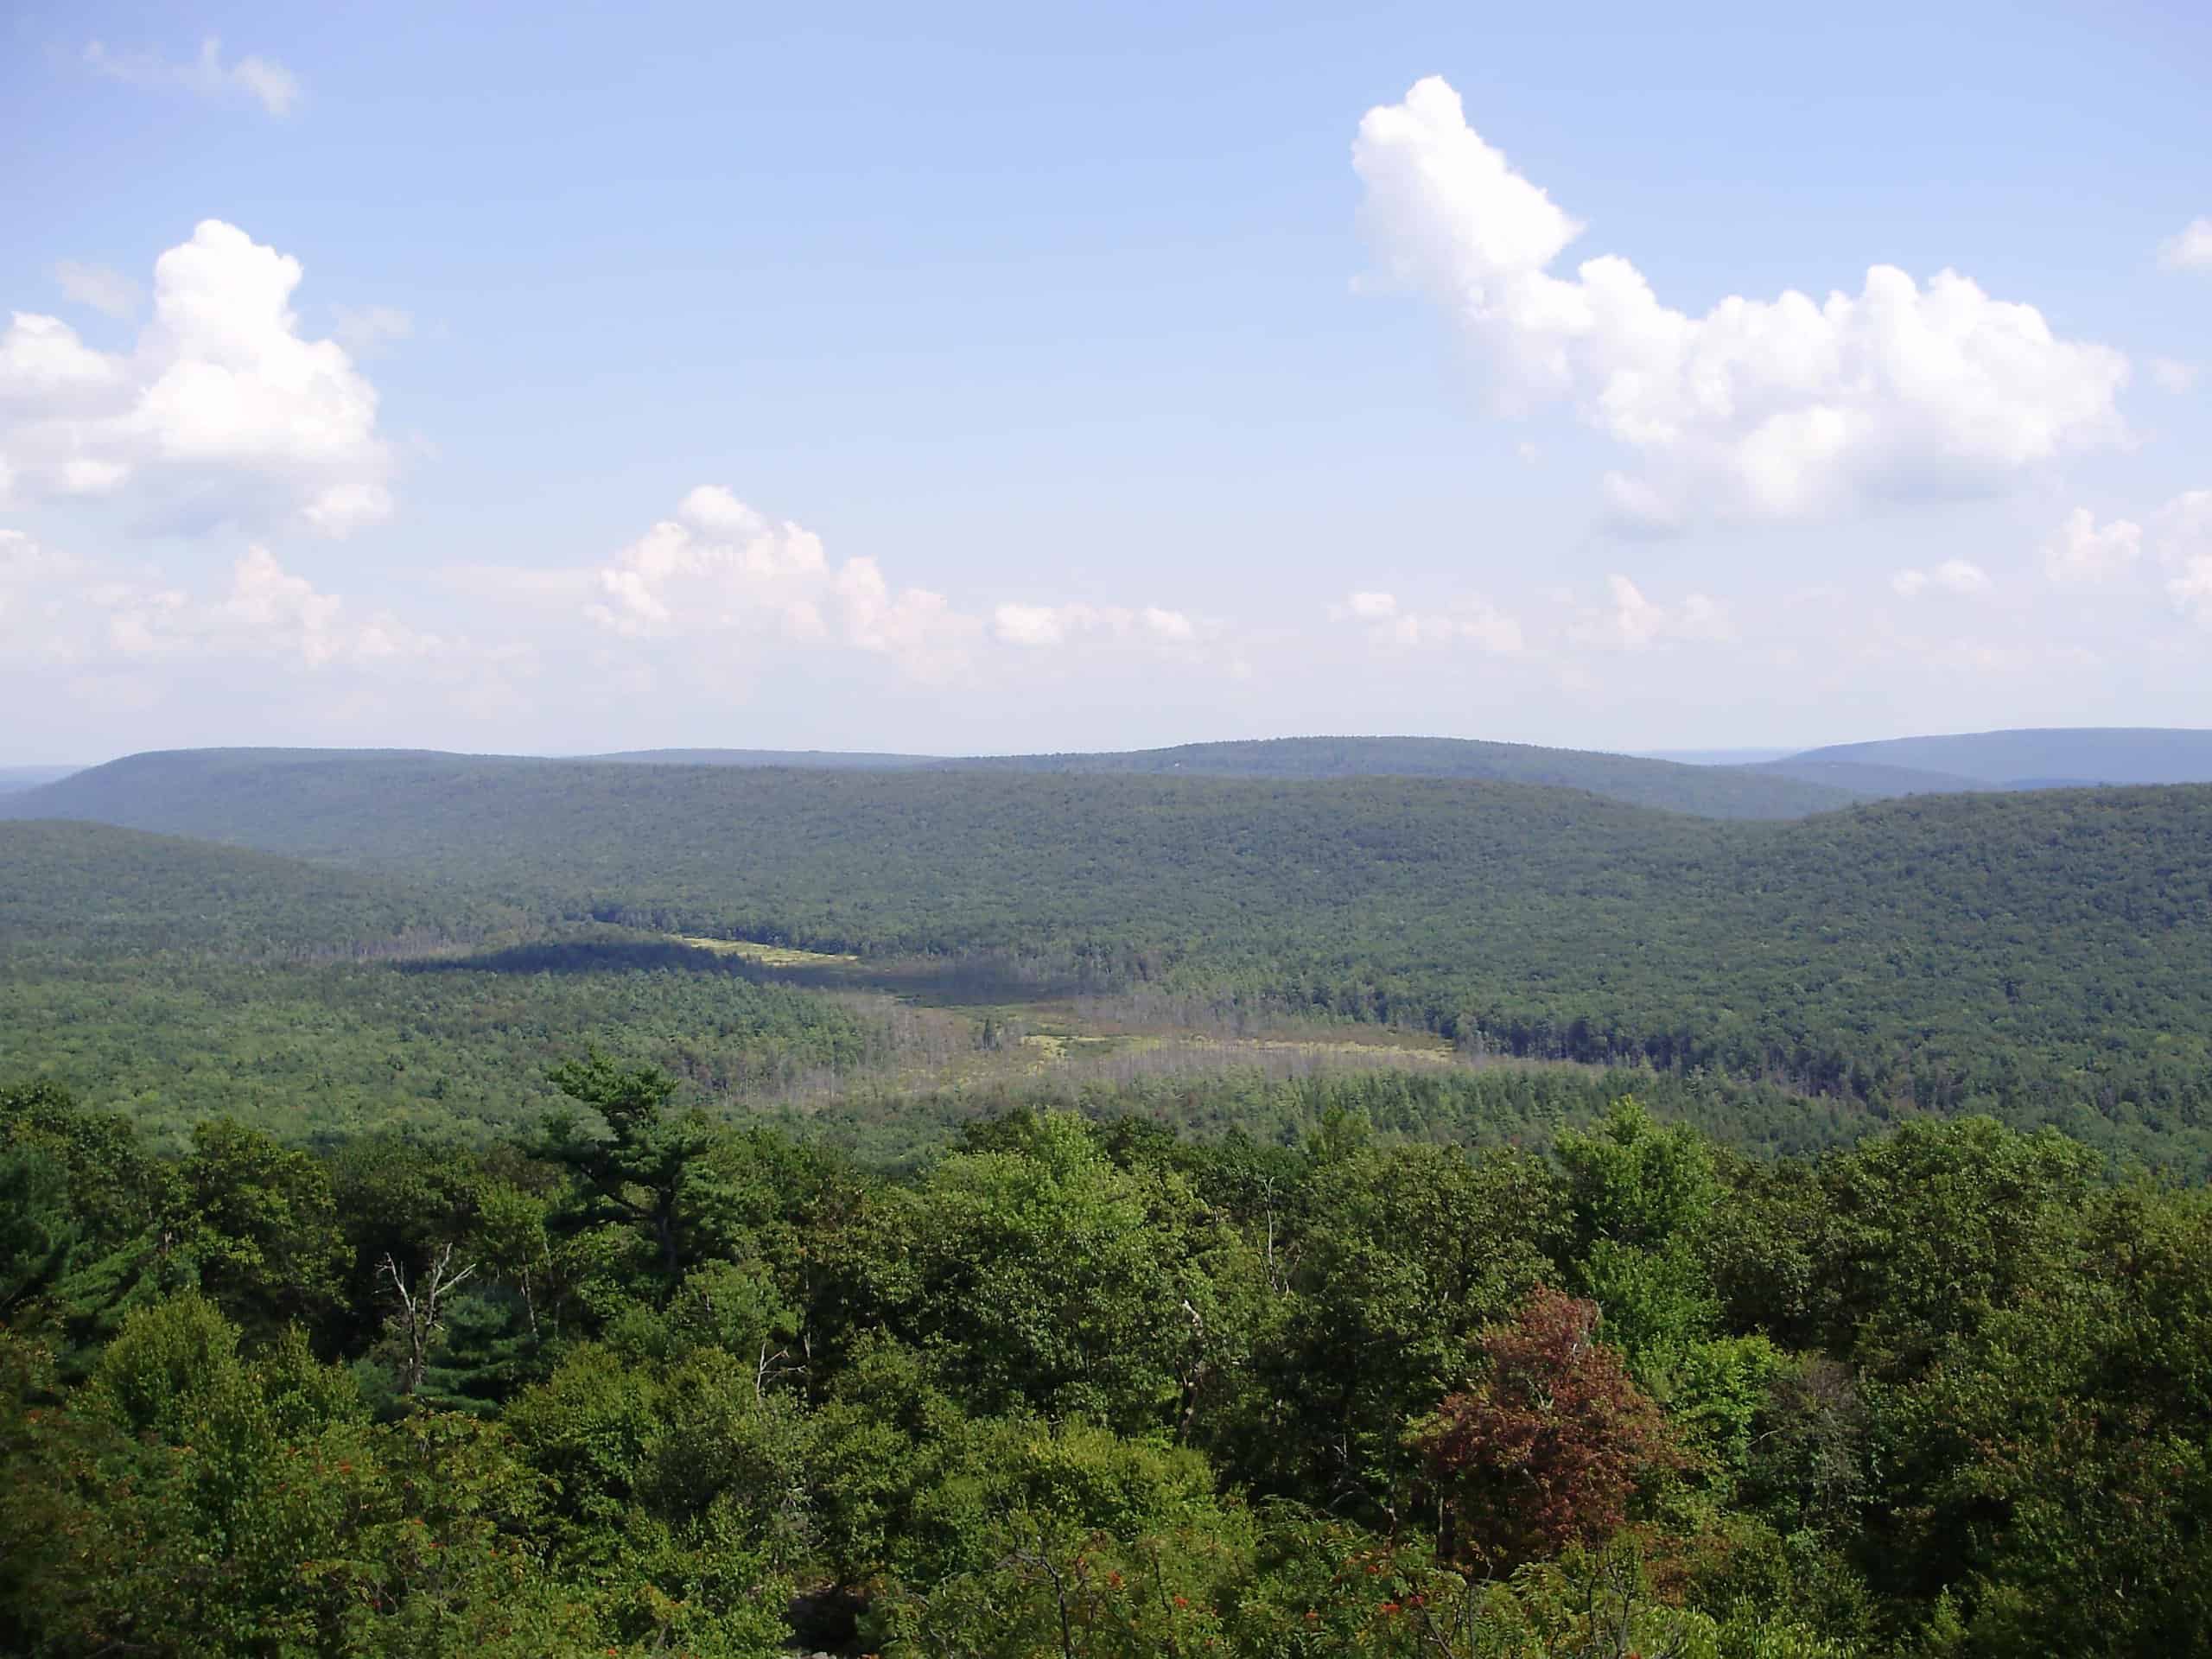 File:2012-08-22 View of Bear Meadows in Pennsylvania in Rothrock State Forest from the Mid-State Trail to the northwest.jpg by Famartin